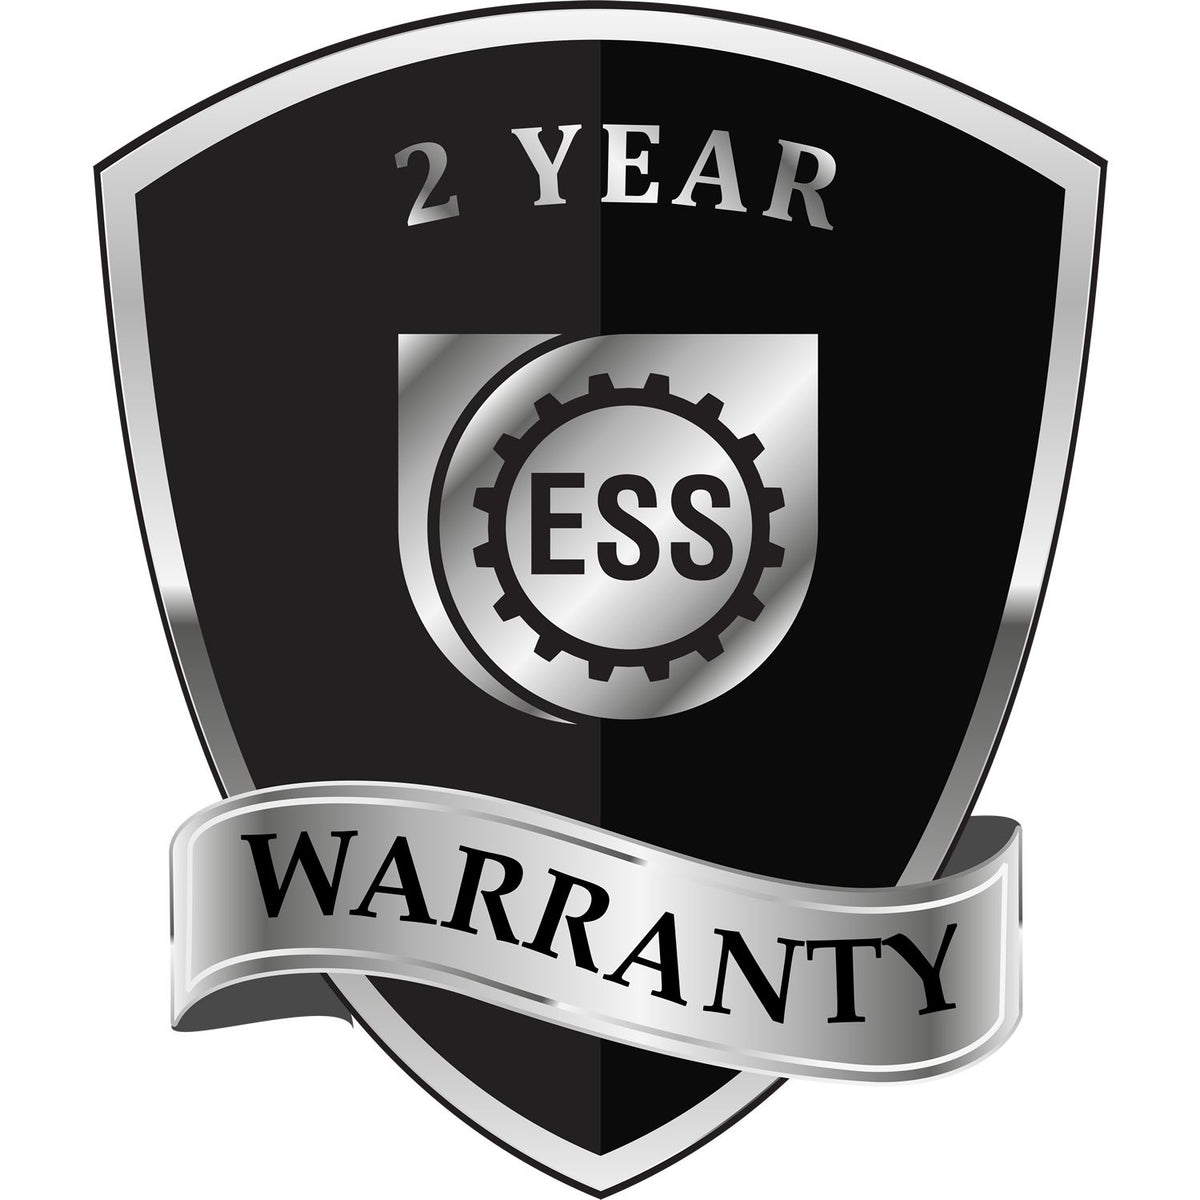 A badge or emblem showing a warranty icon for the Indiana Engineer Desk Seal